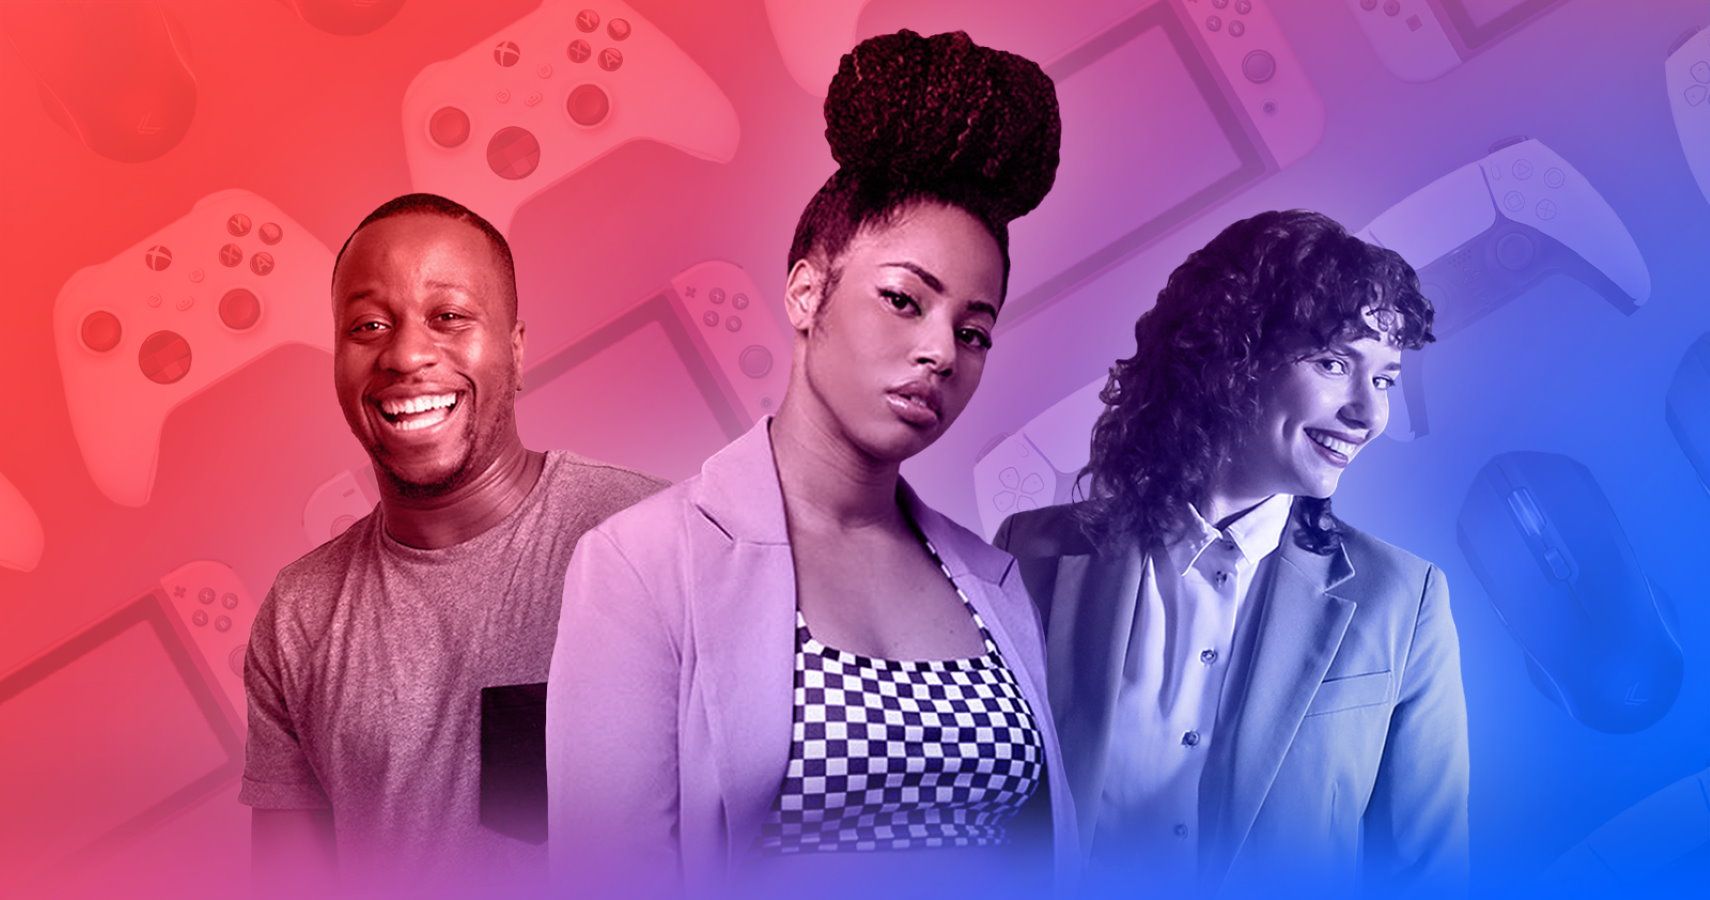 Ubisoft Launches New Video Game Culture Channel gTV This Thursday [EMBARGO 5pm GMT]